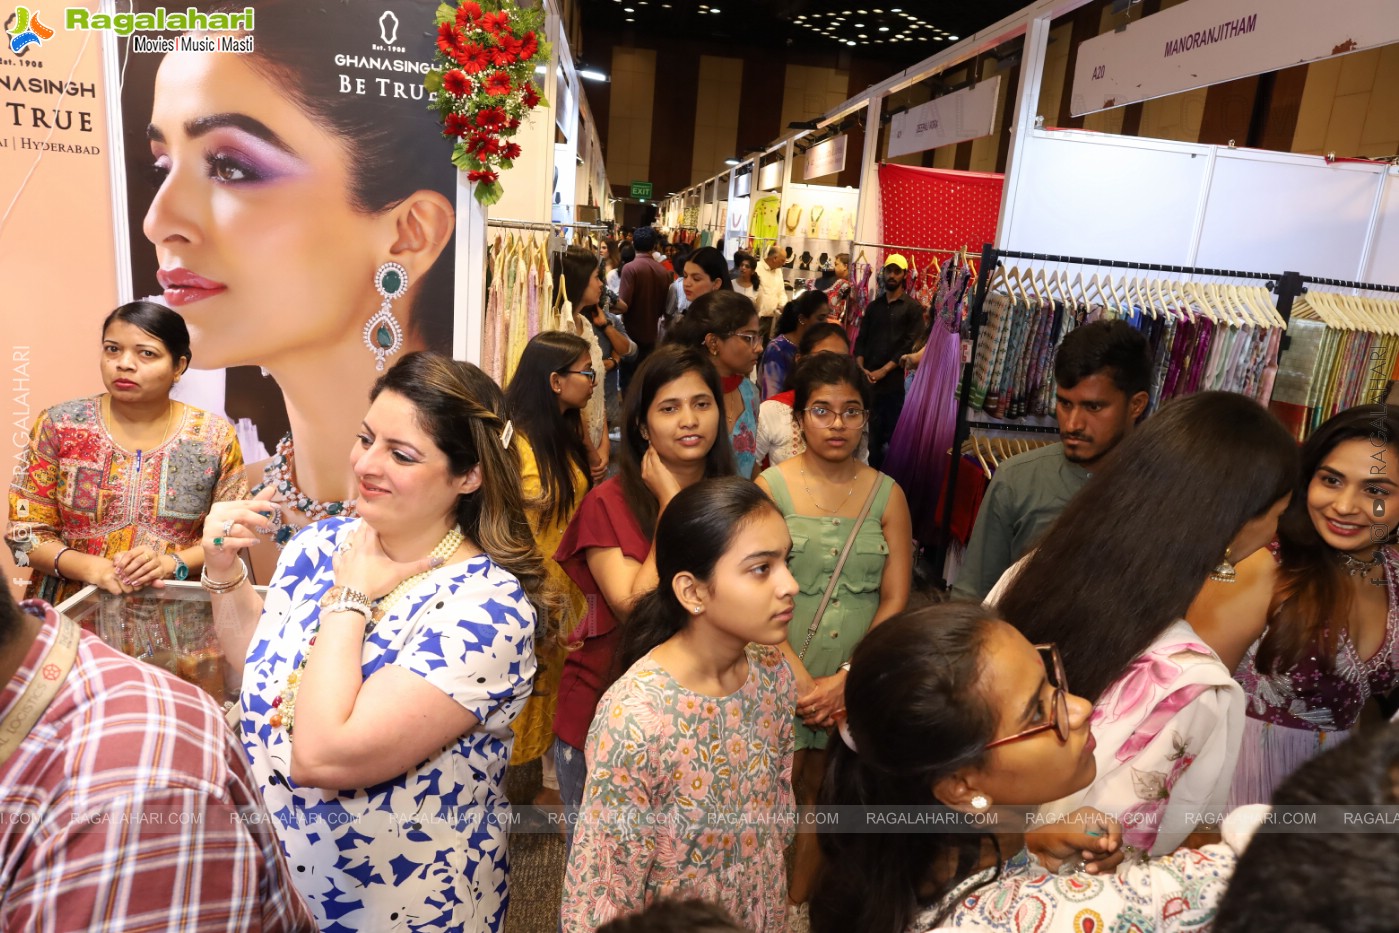 Hi Life Exhibition - Grand Launch of Fashions Summer Special Exhibition at HICC